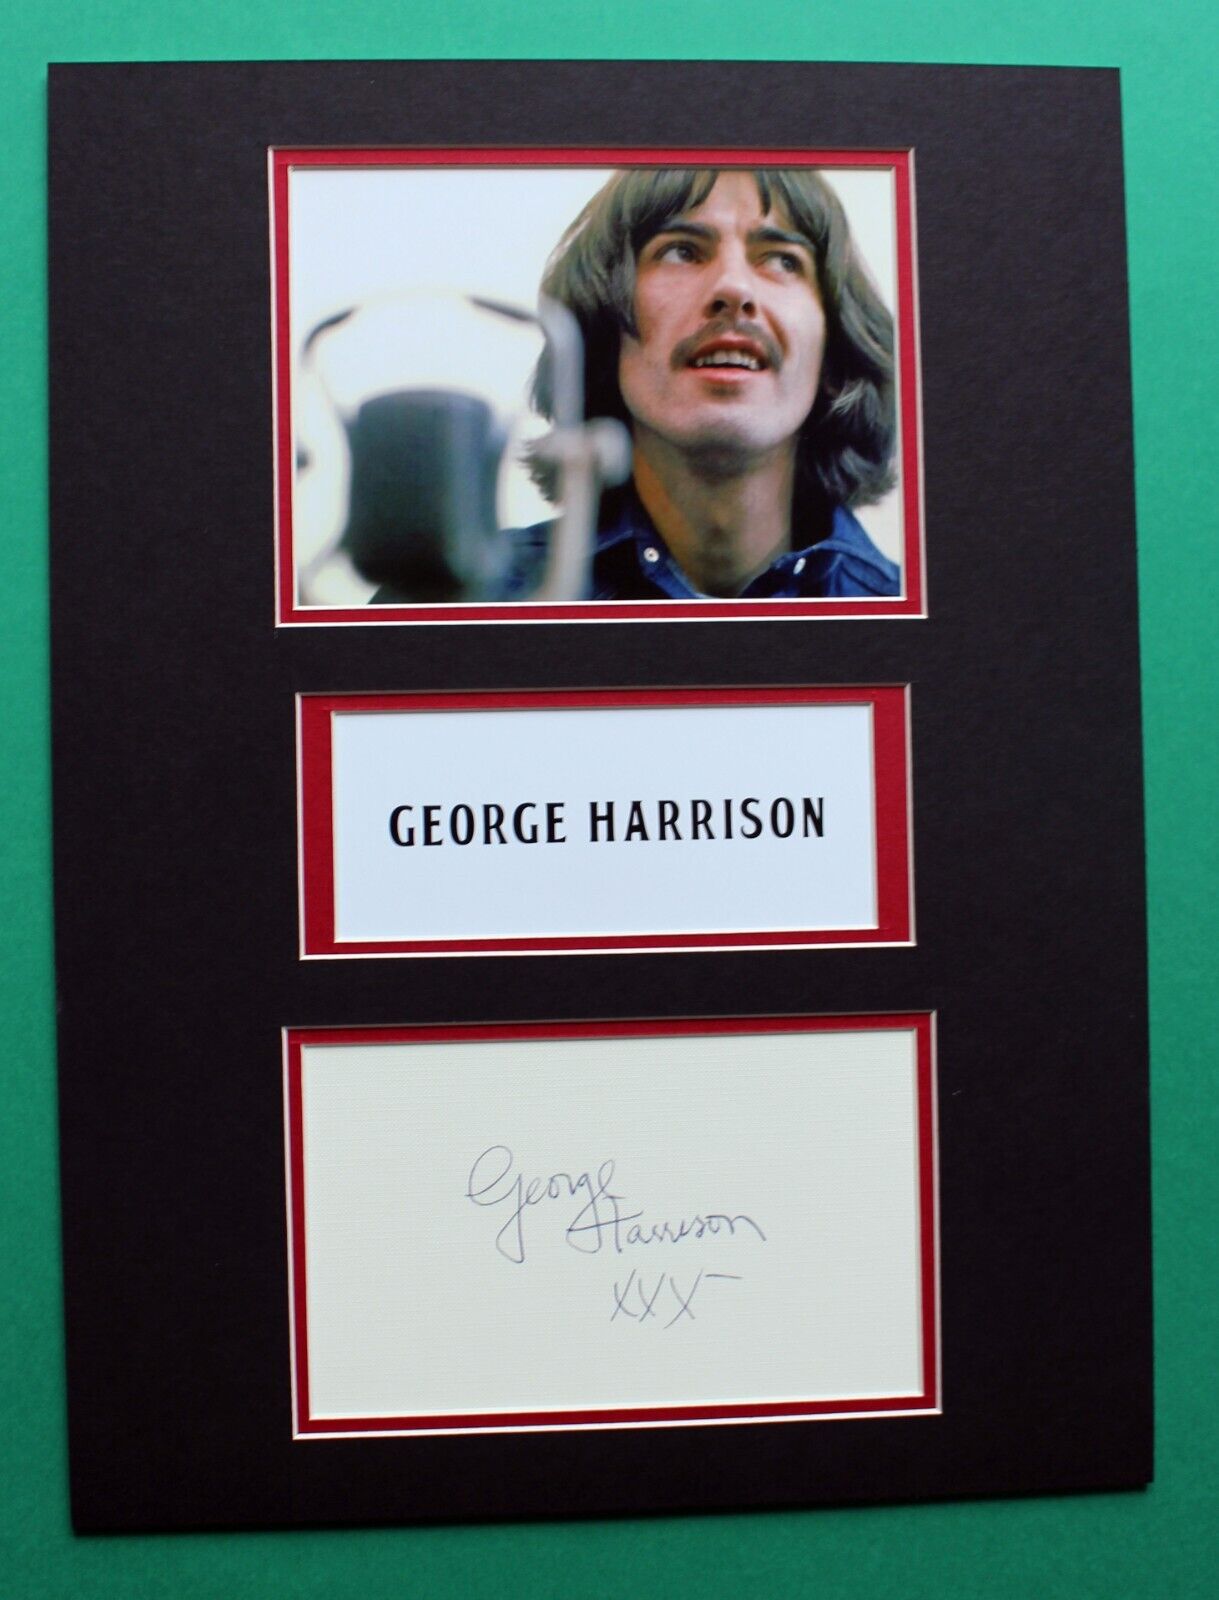 GEORGE HARRISON AUTOGRAPH artistic display The Beatles